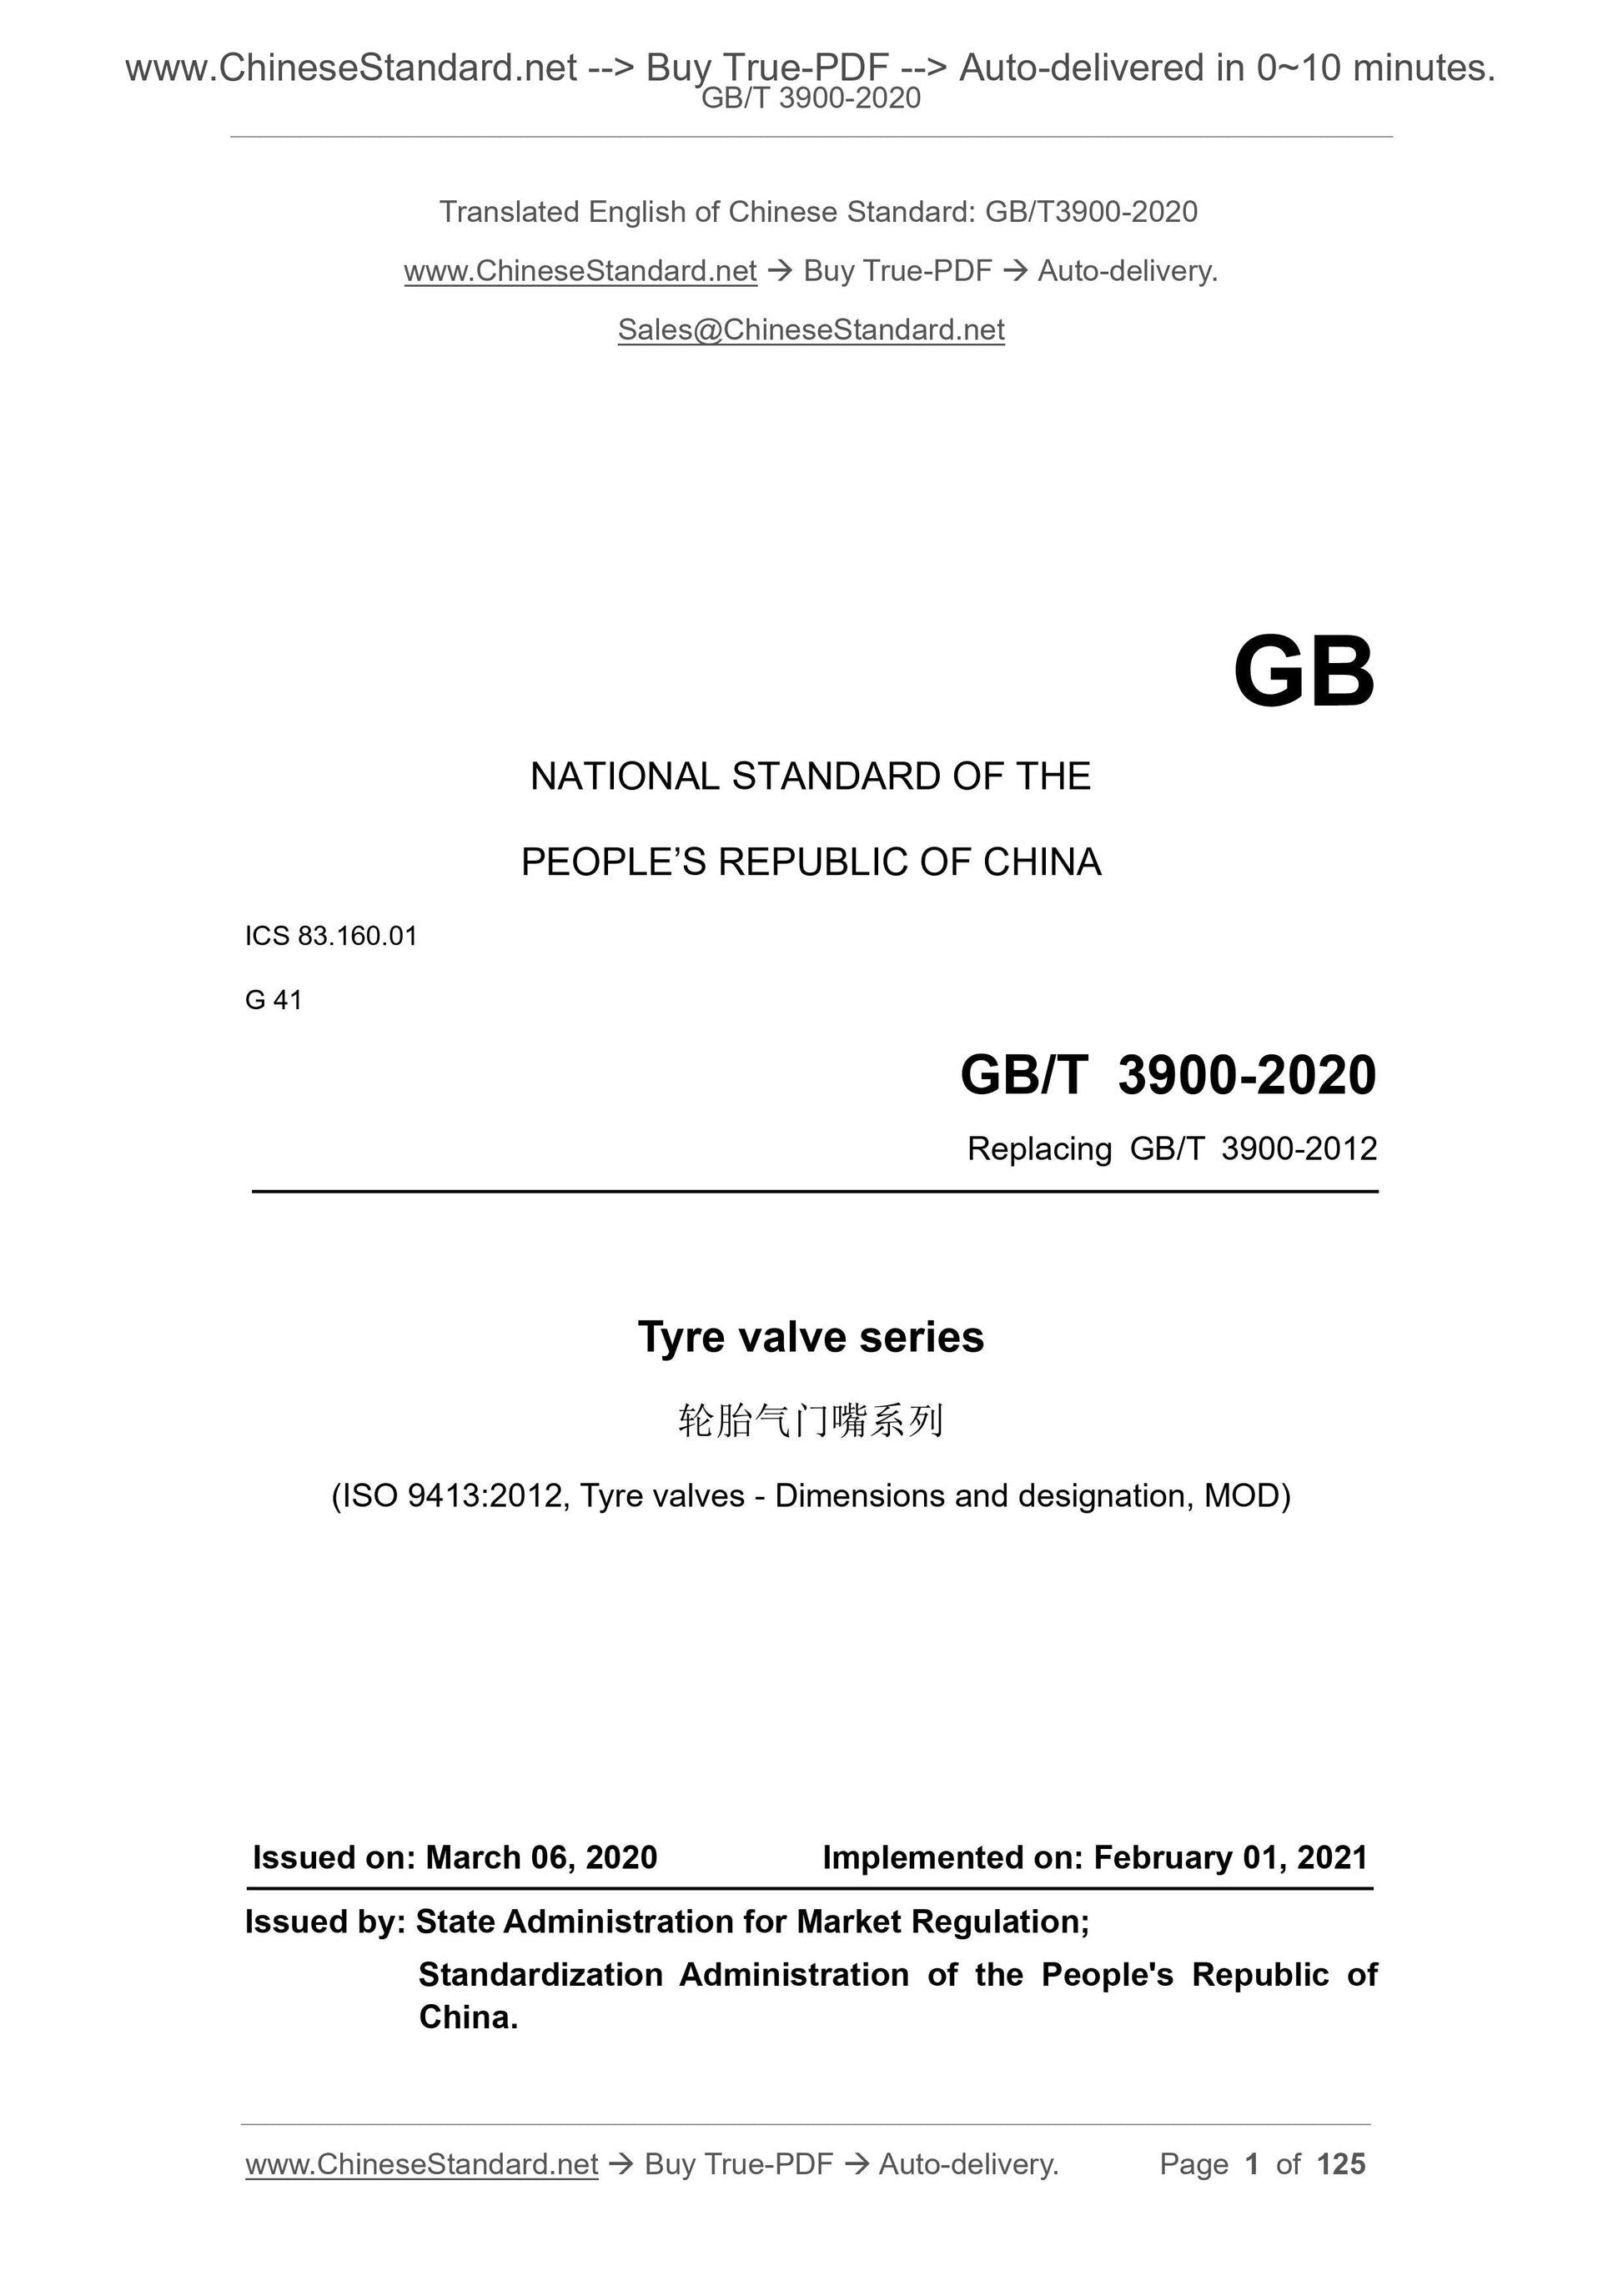 GB/T 3900-2020 Page 1